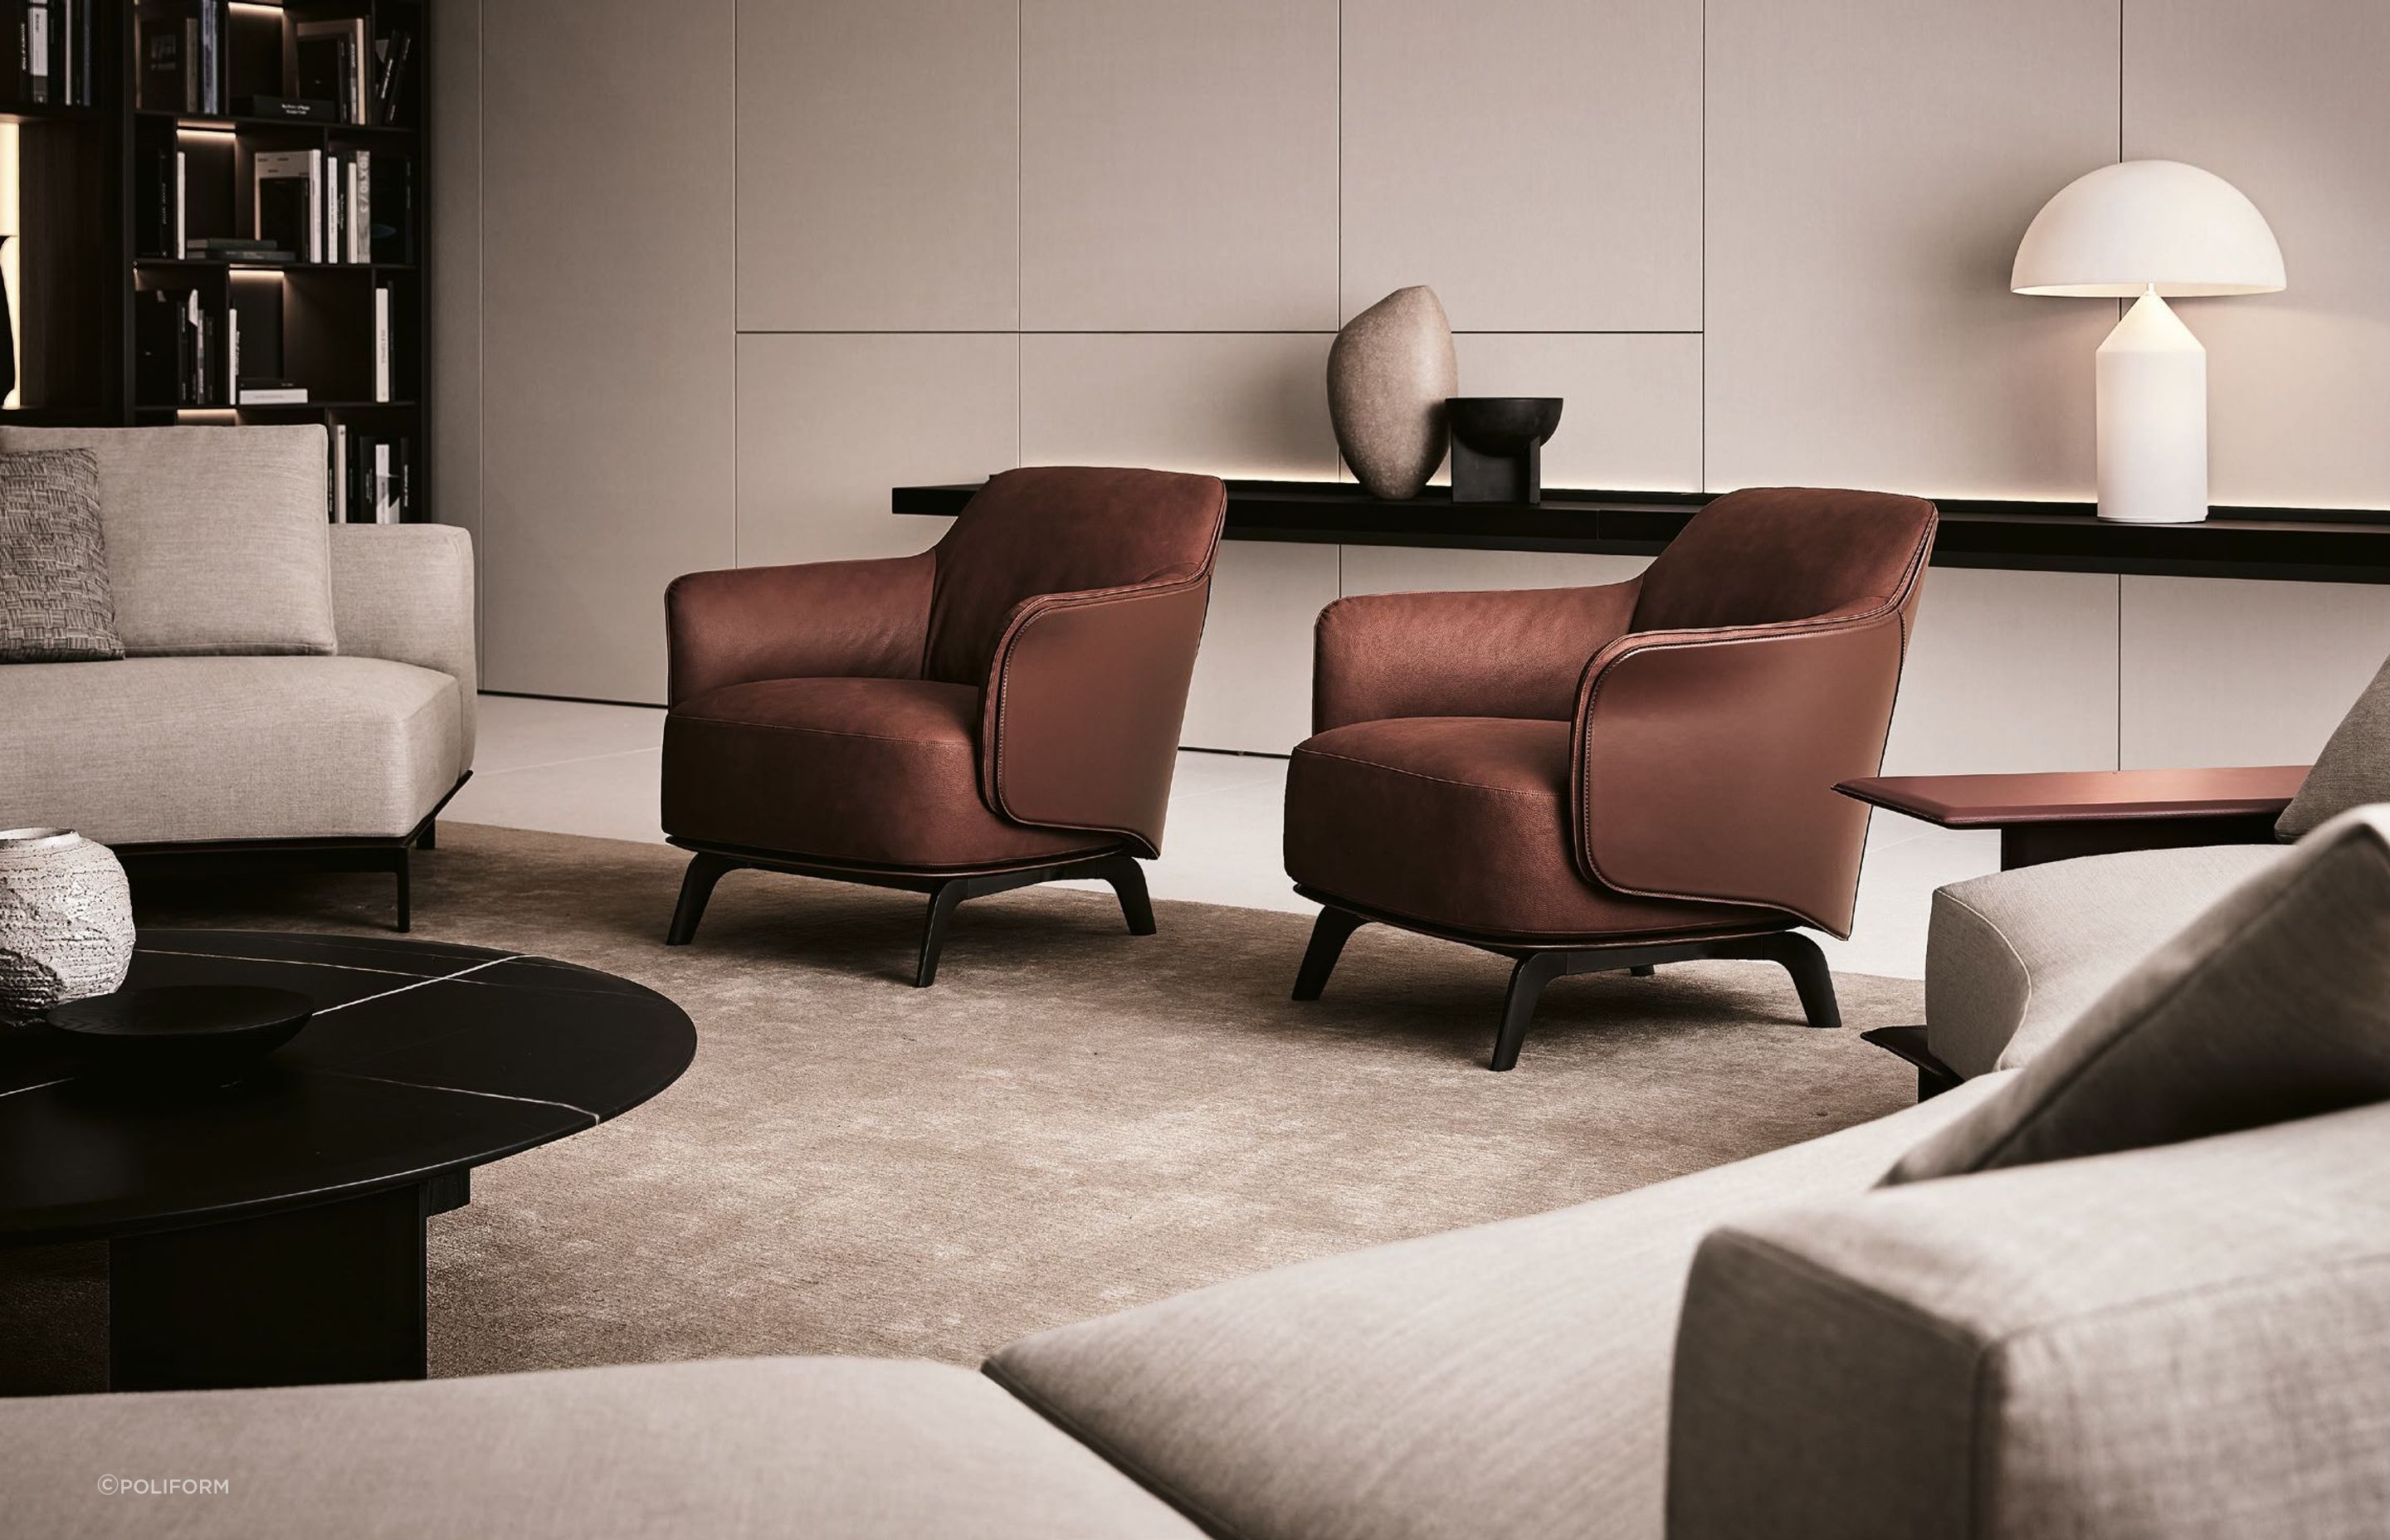 The Kaori chair by Jean-Marie Massaud adds a sophisticated element to any living space